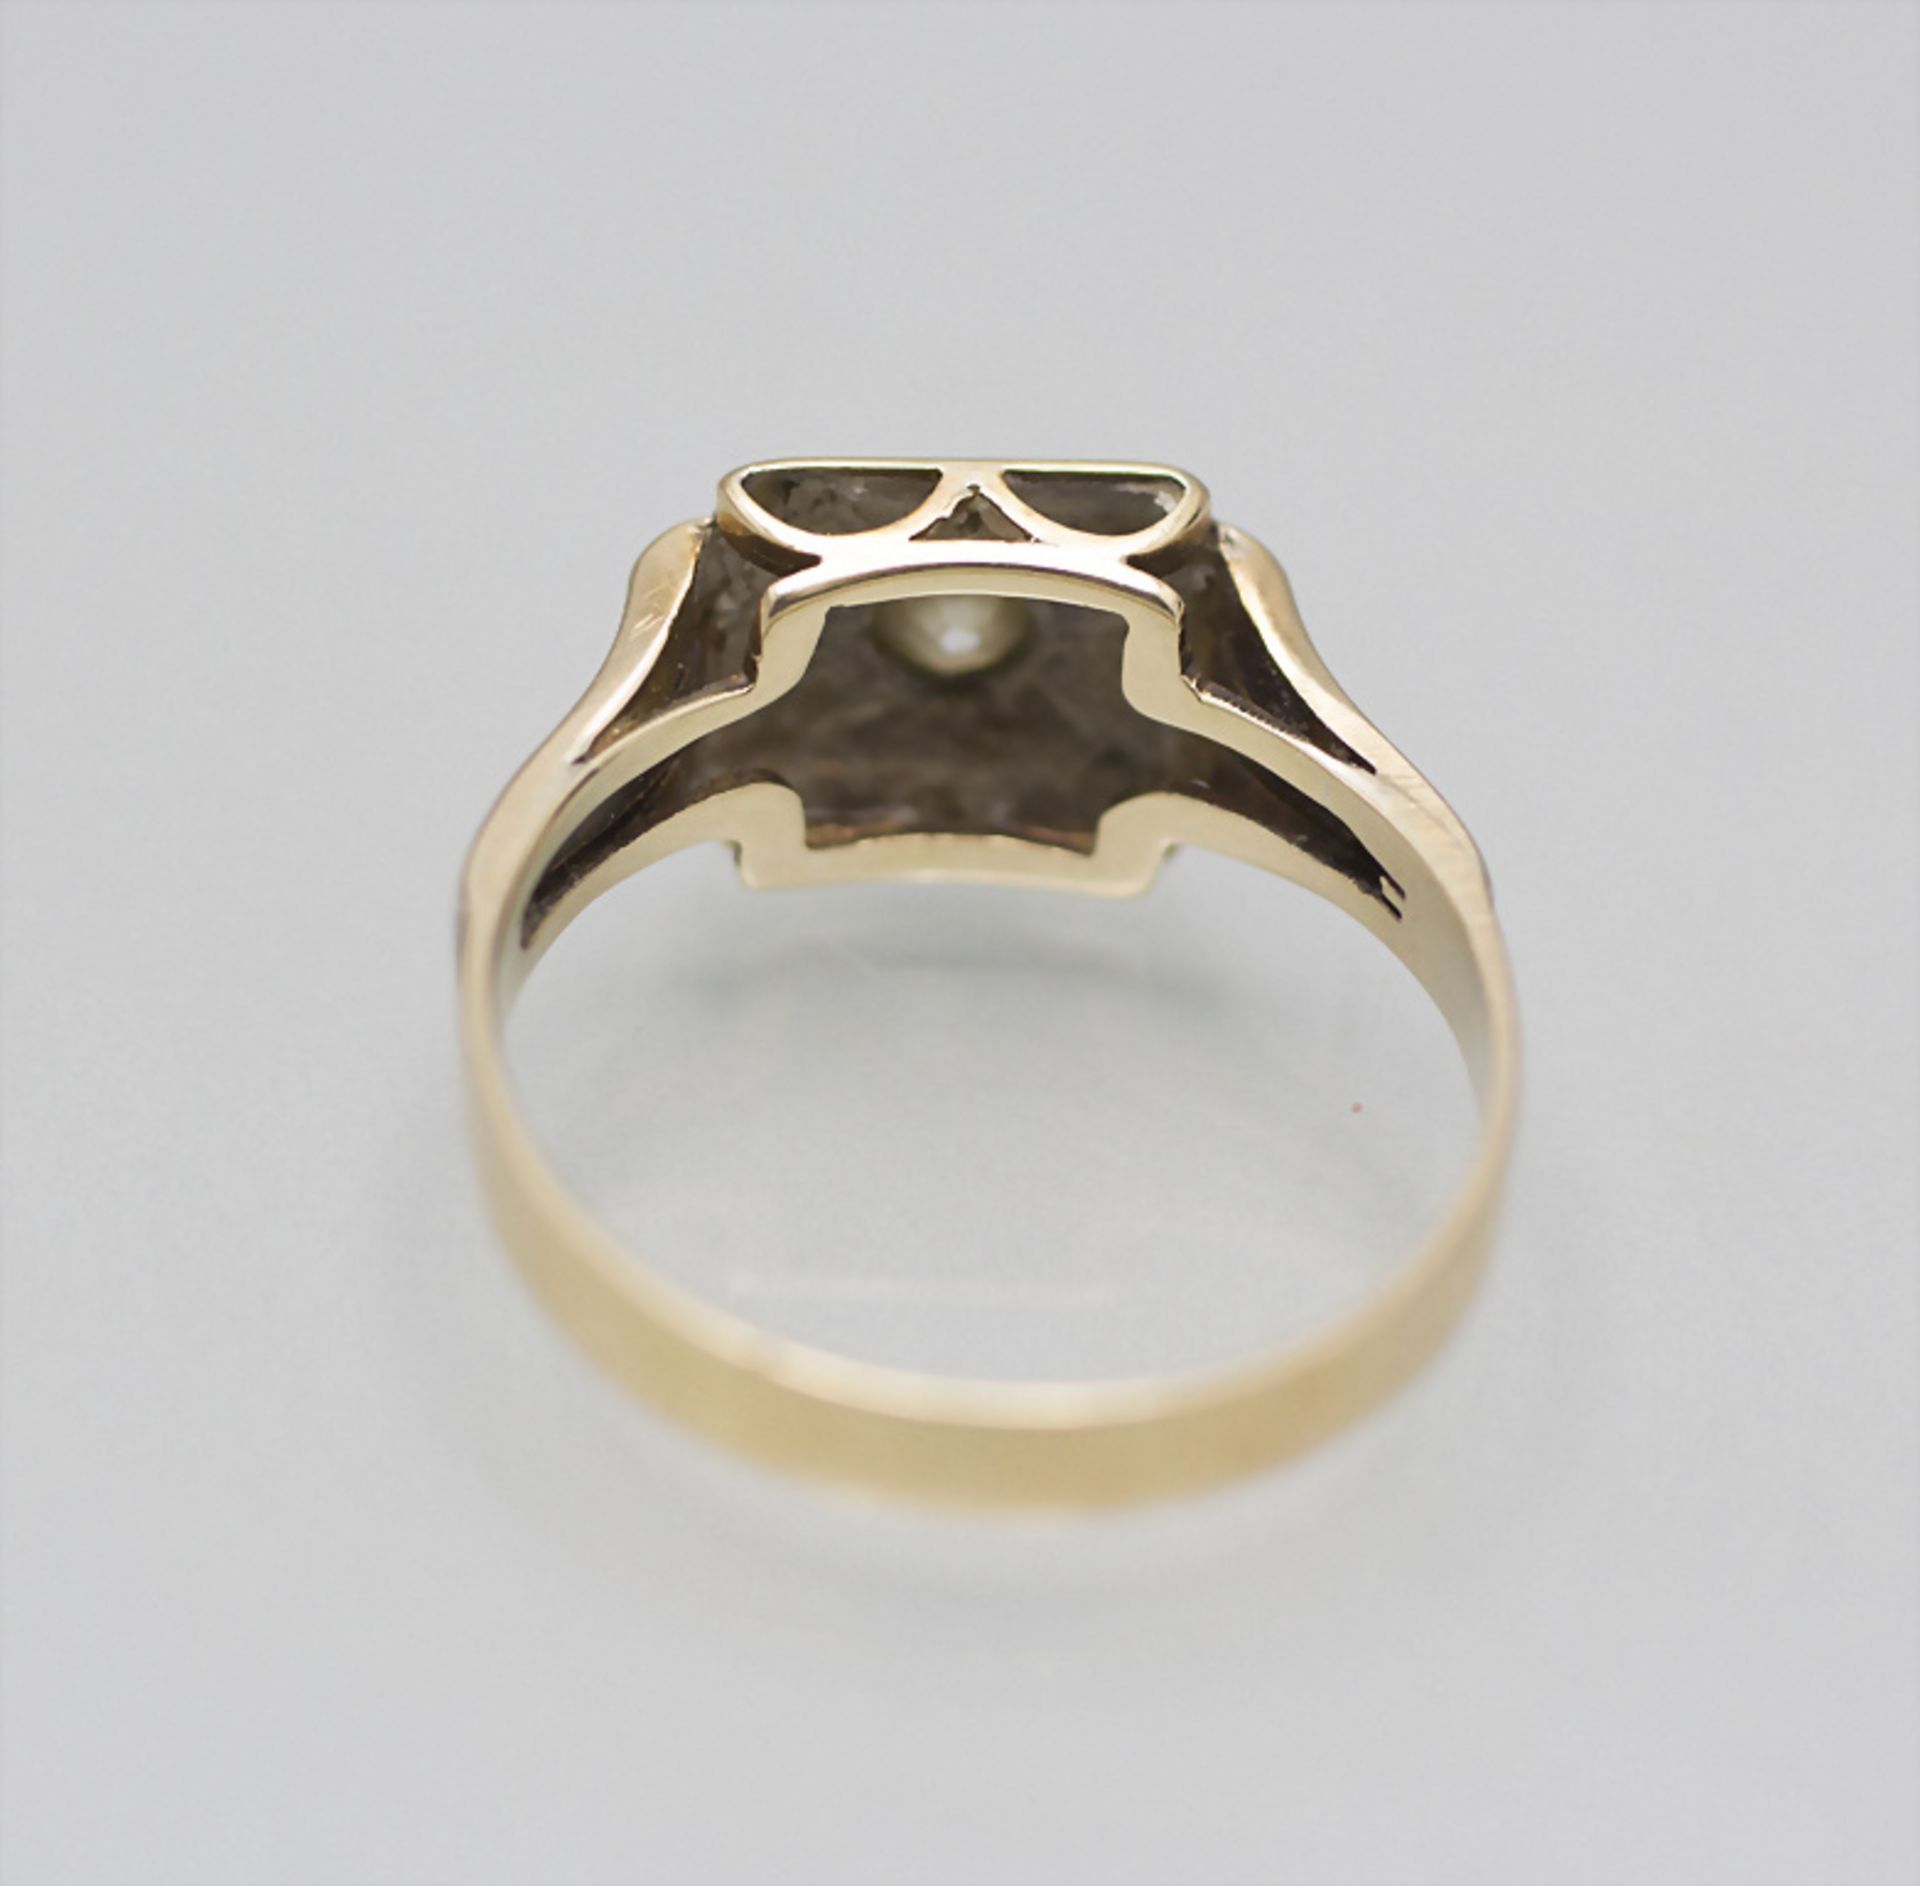 Damenring mit Diamant / A ladies 14 ct gold ring with diamond - Image 3 of 3